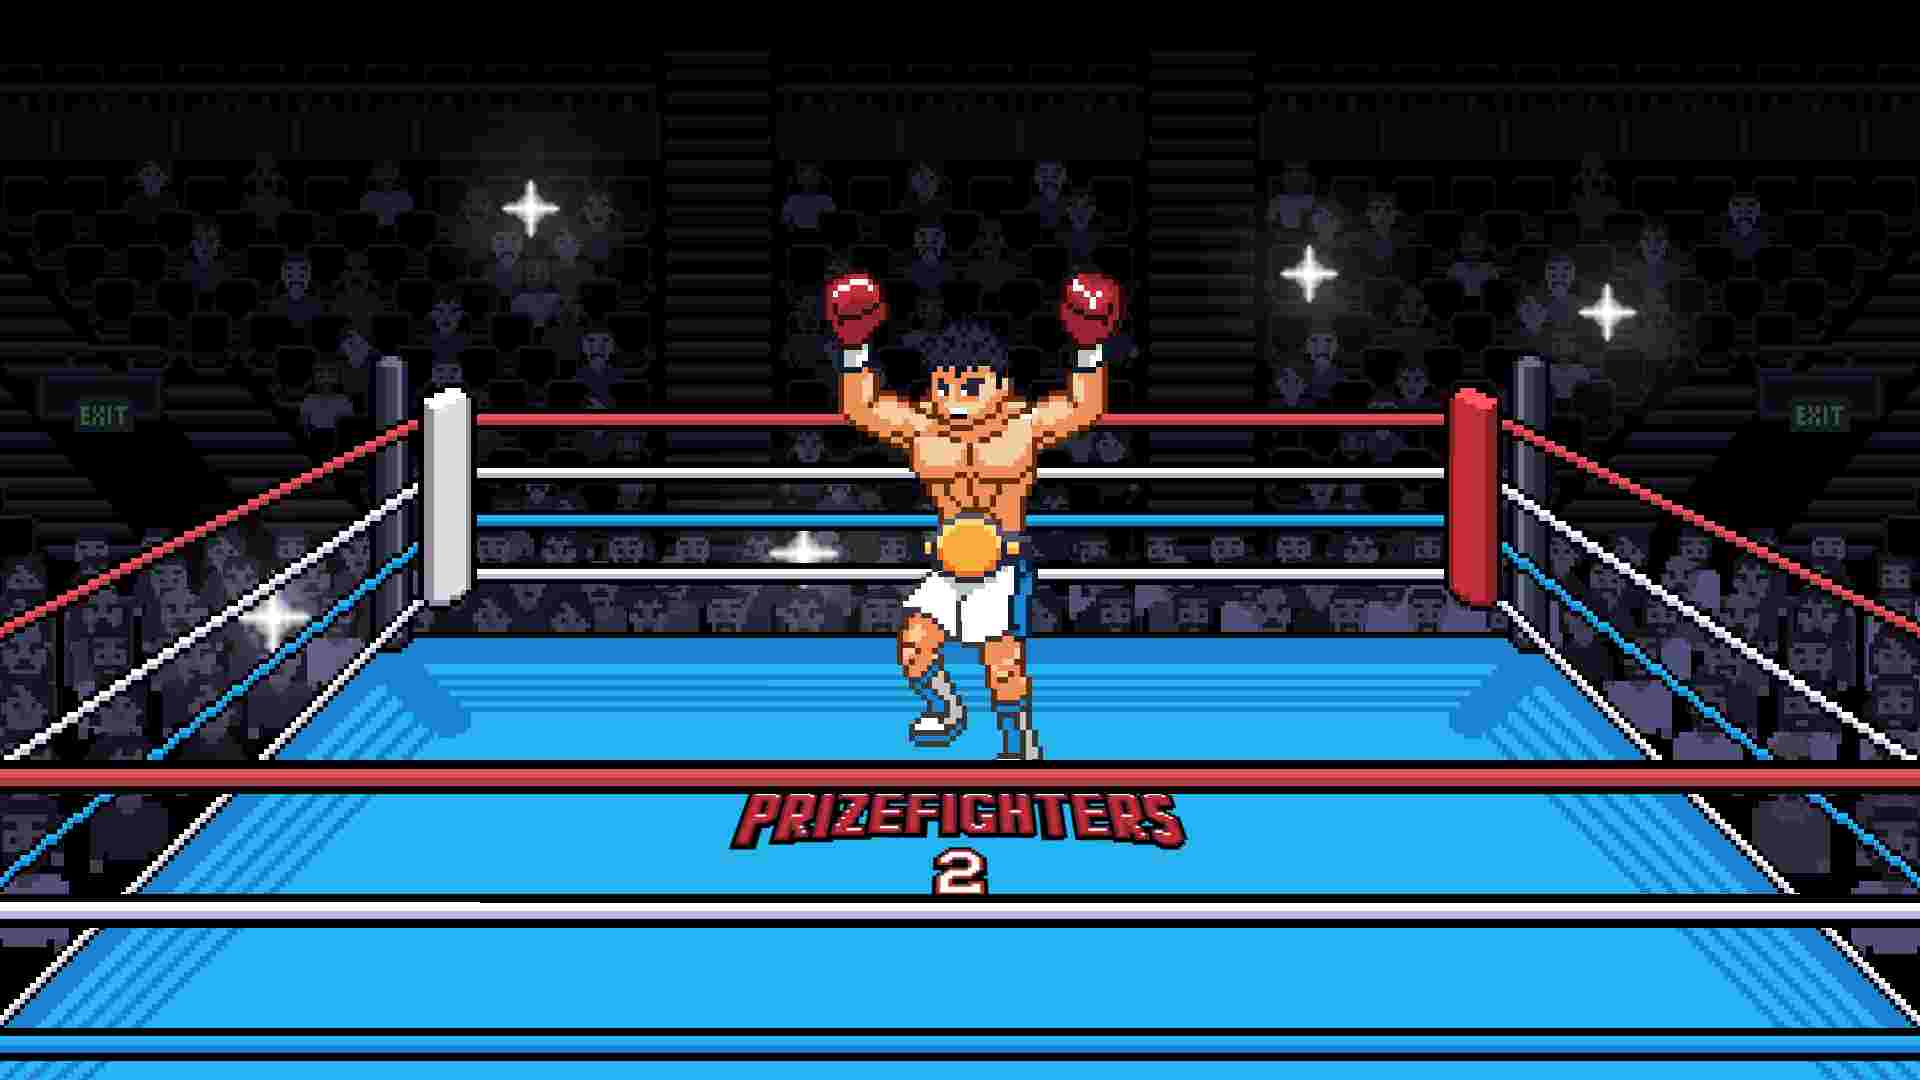 Game Prizefighters 2 